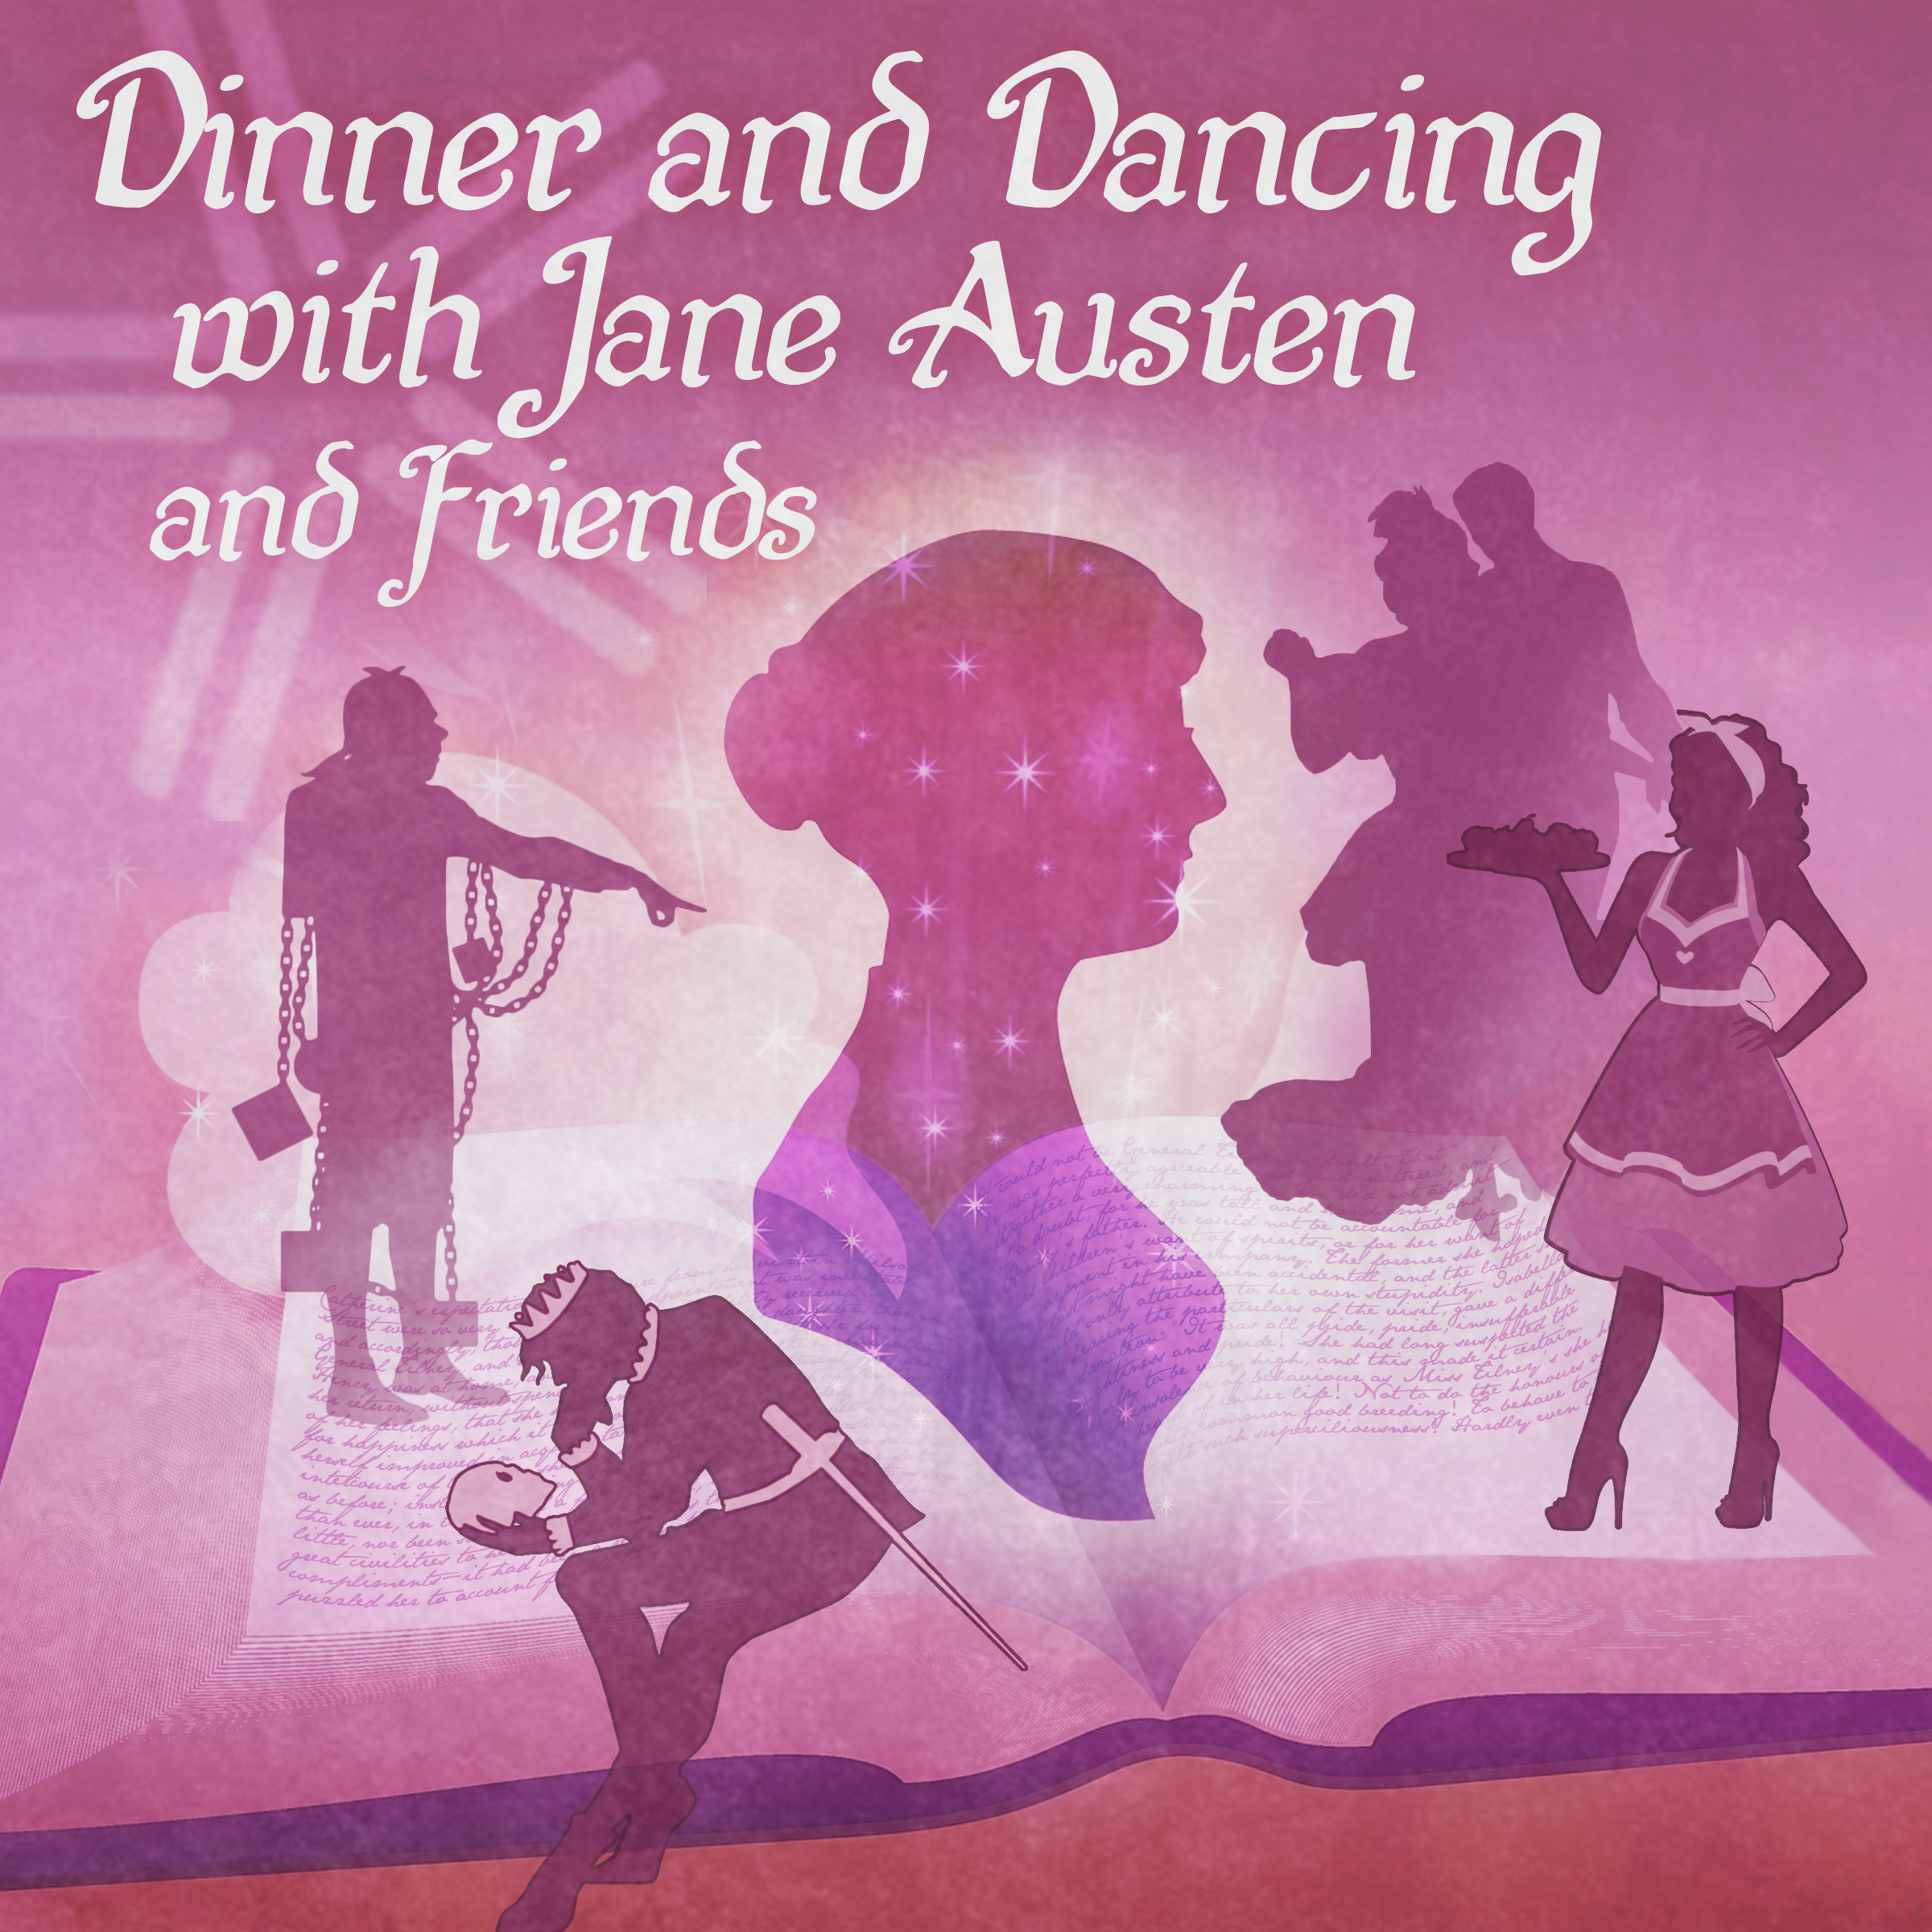 Dinner and Dancing with Jane Austen and Friends